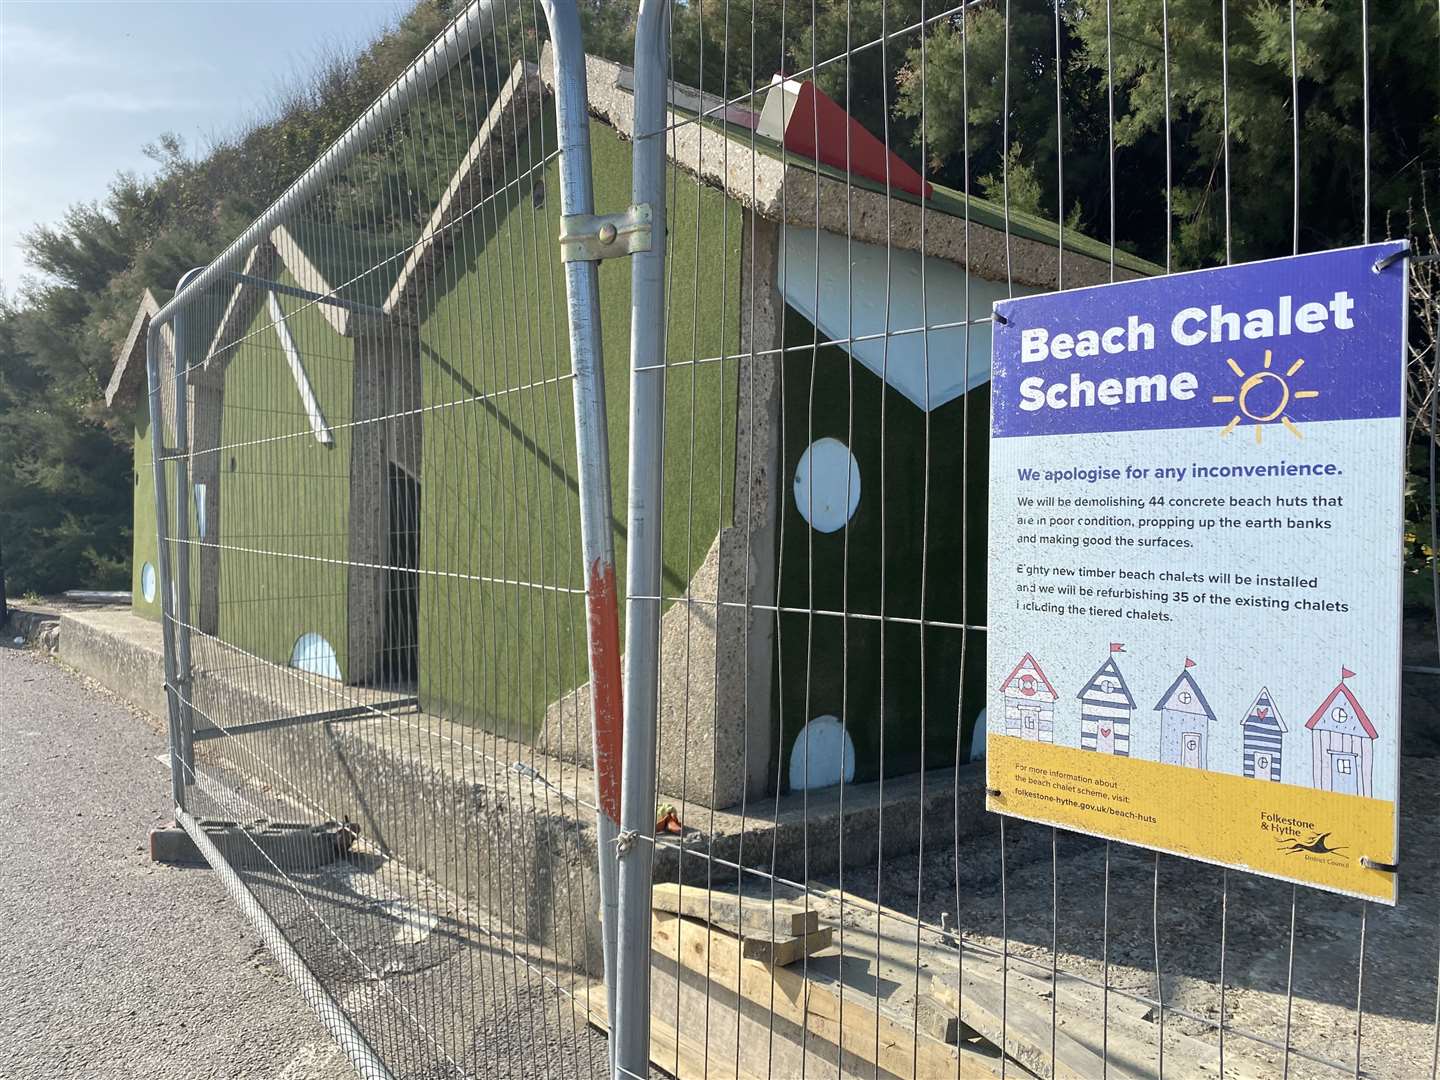 Work is taking place to repair and replace some of the beach huts between Folkestone and Sandgate